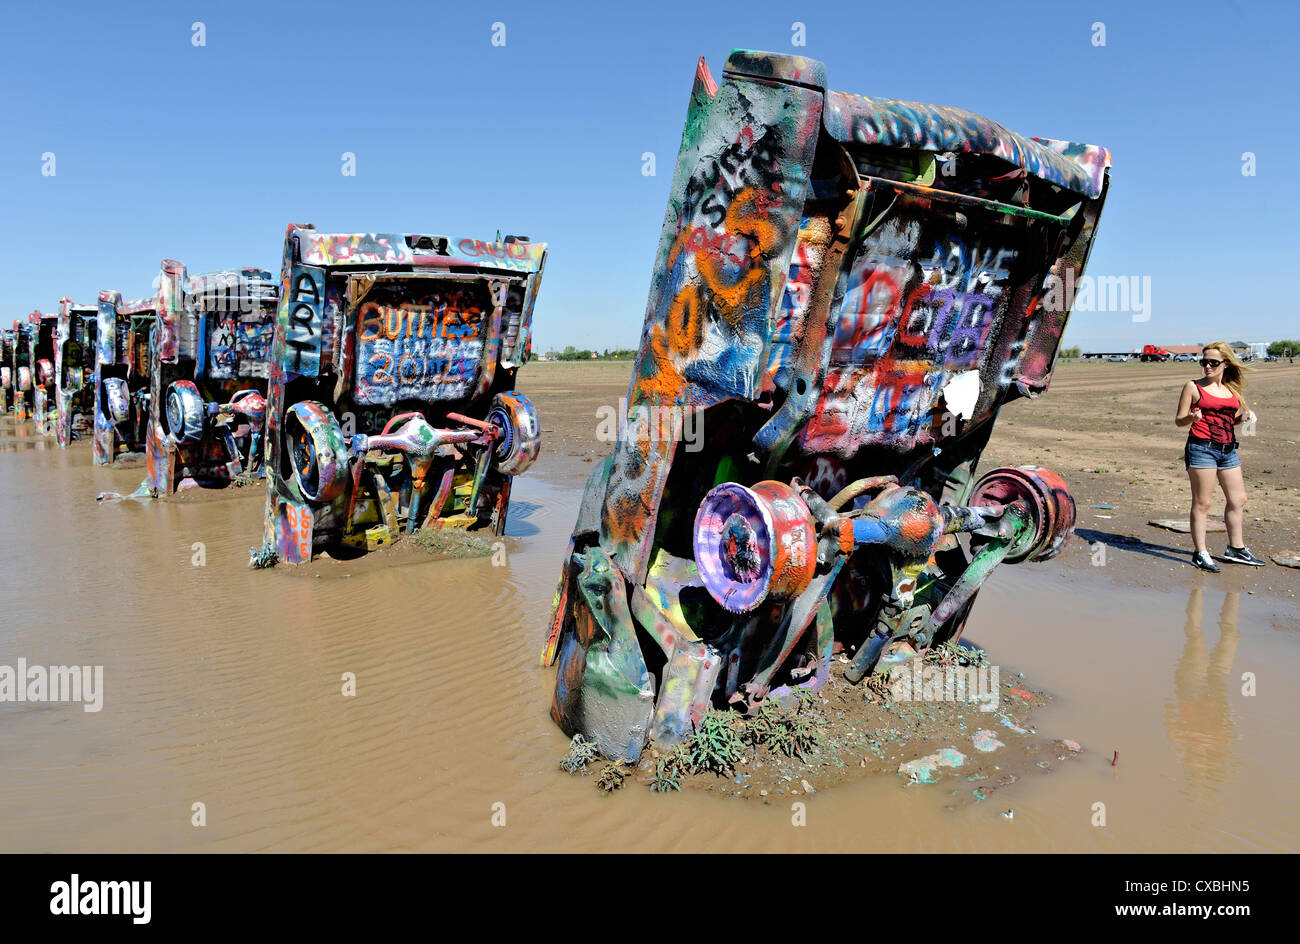 Cadillac Ranch, -art installation sculpture located on Route 66 in Amarillo Texas. Stock Photo